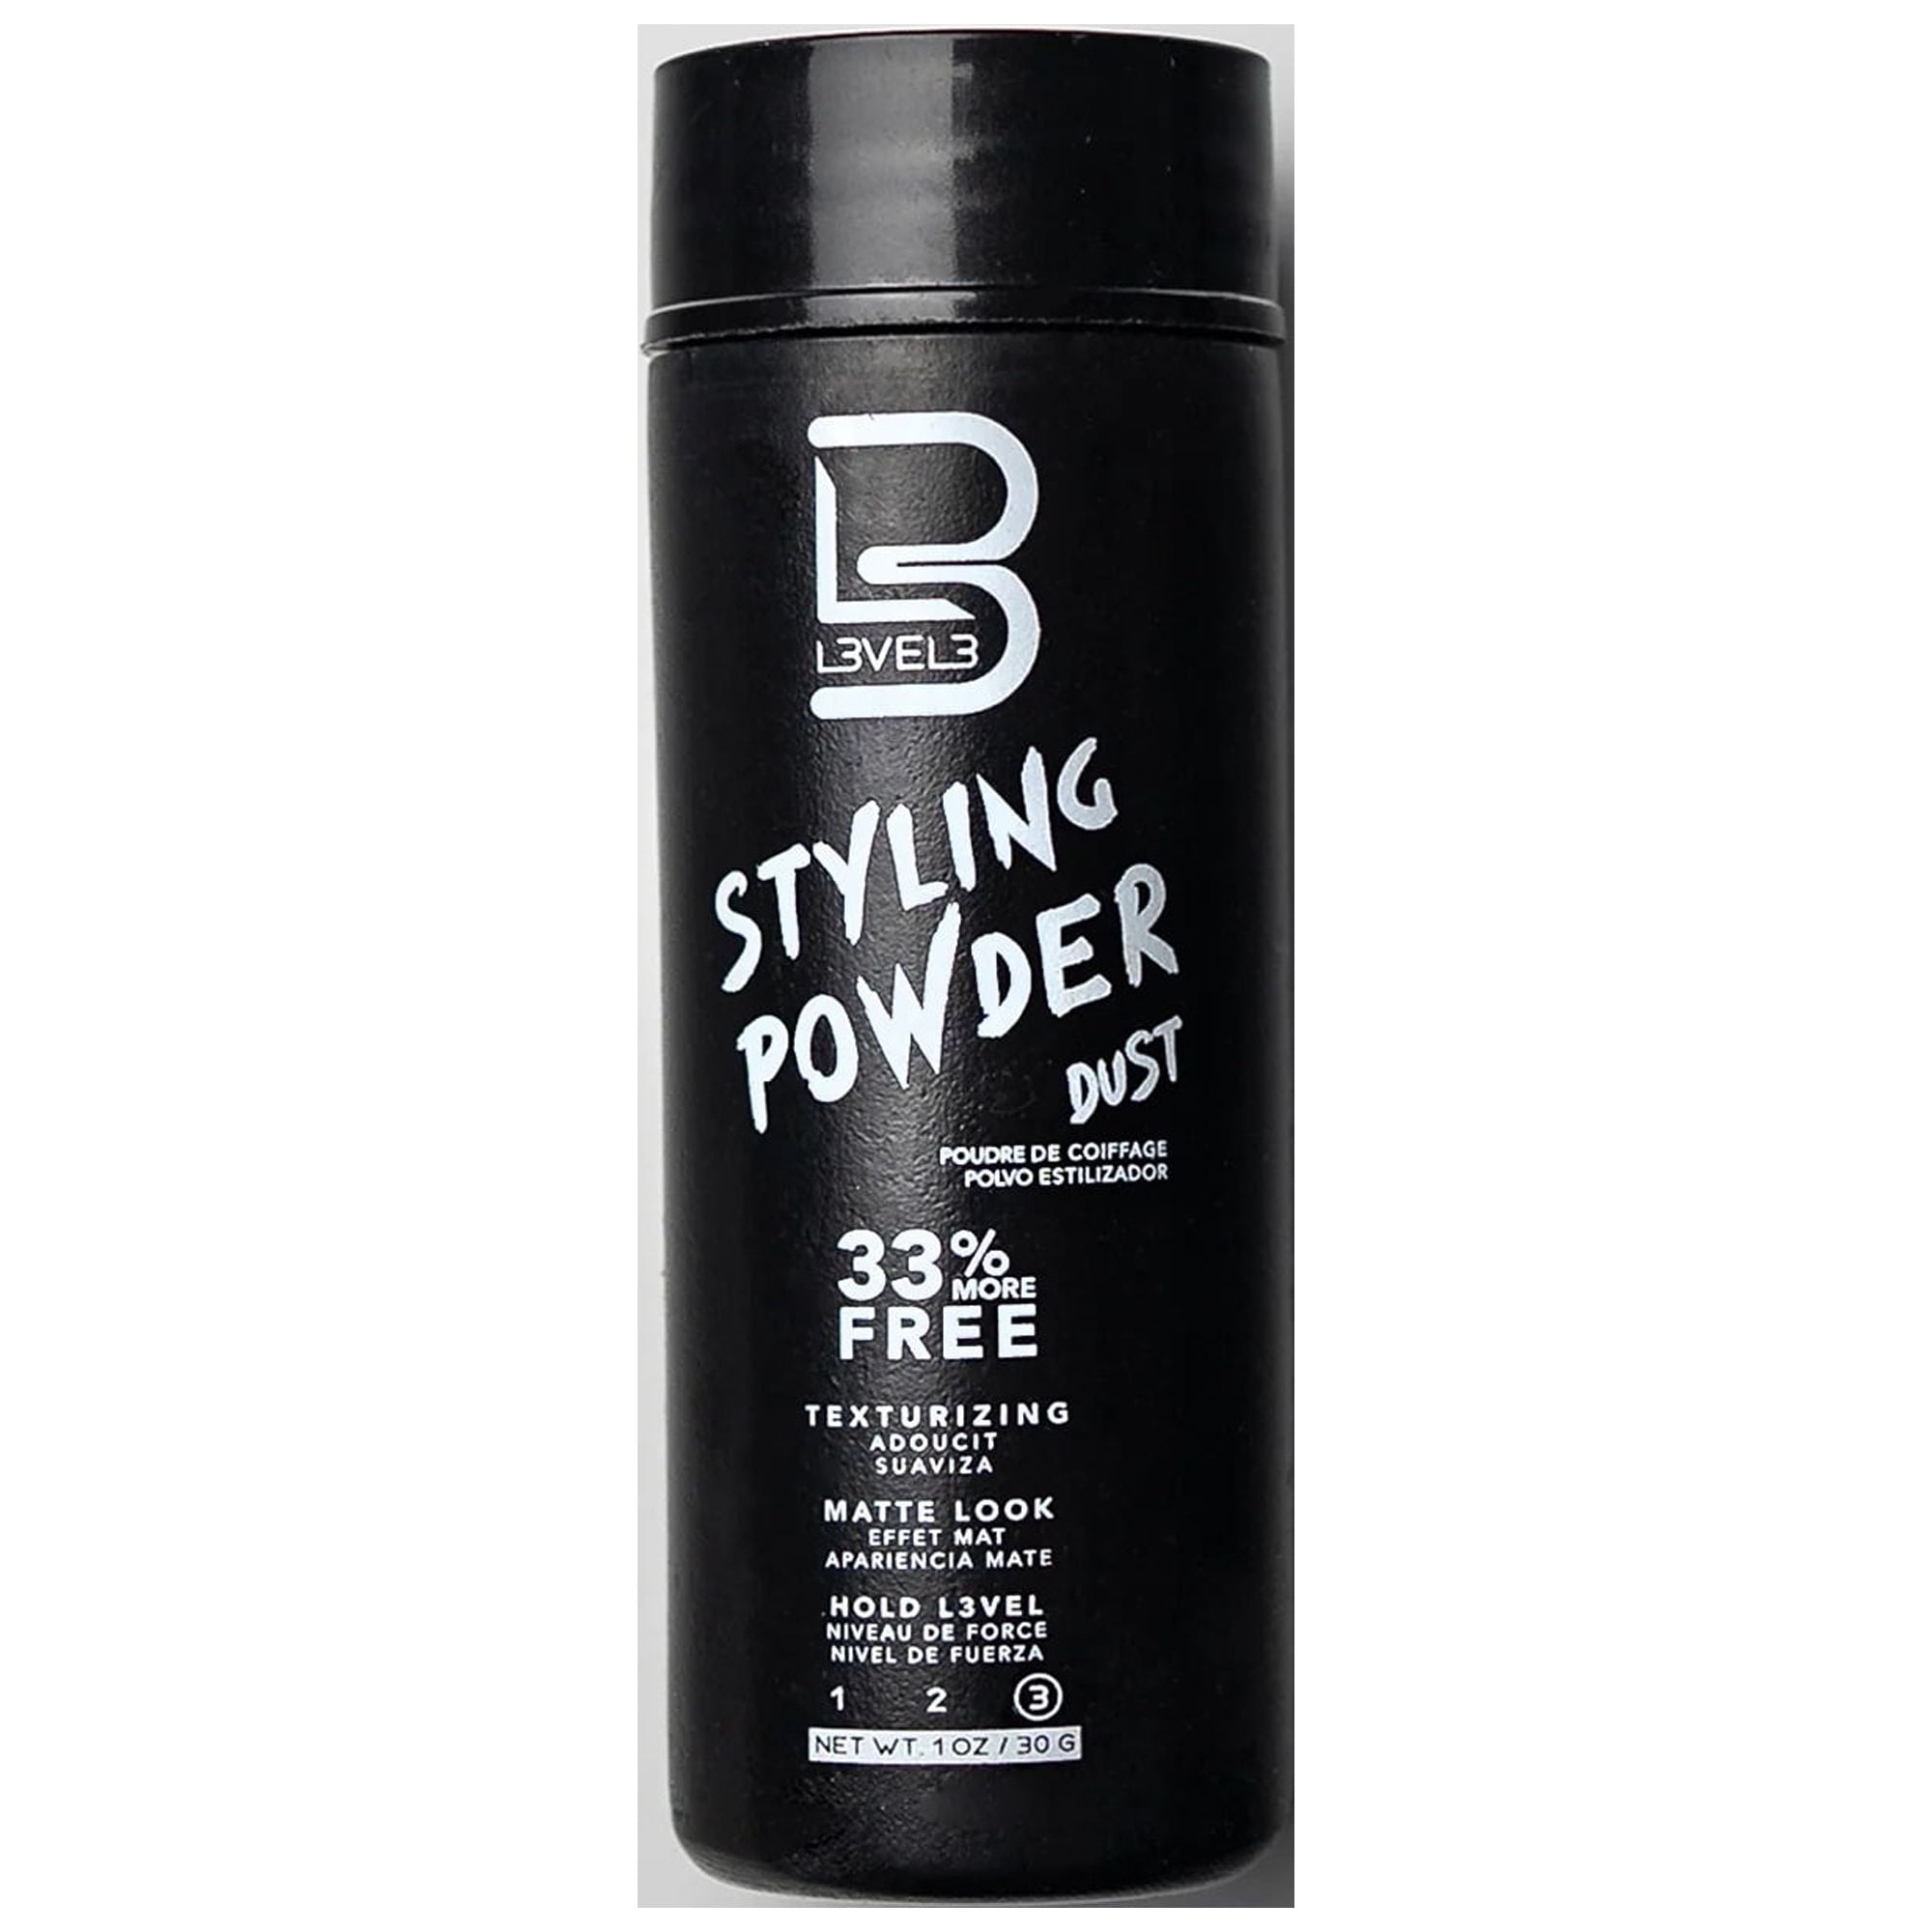 L3 Level 3 Styling Powder - Natural Look Mens Powder - Easy to